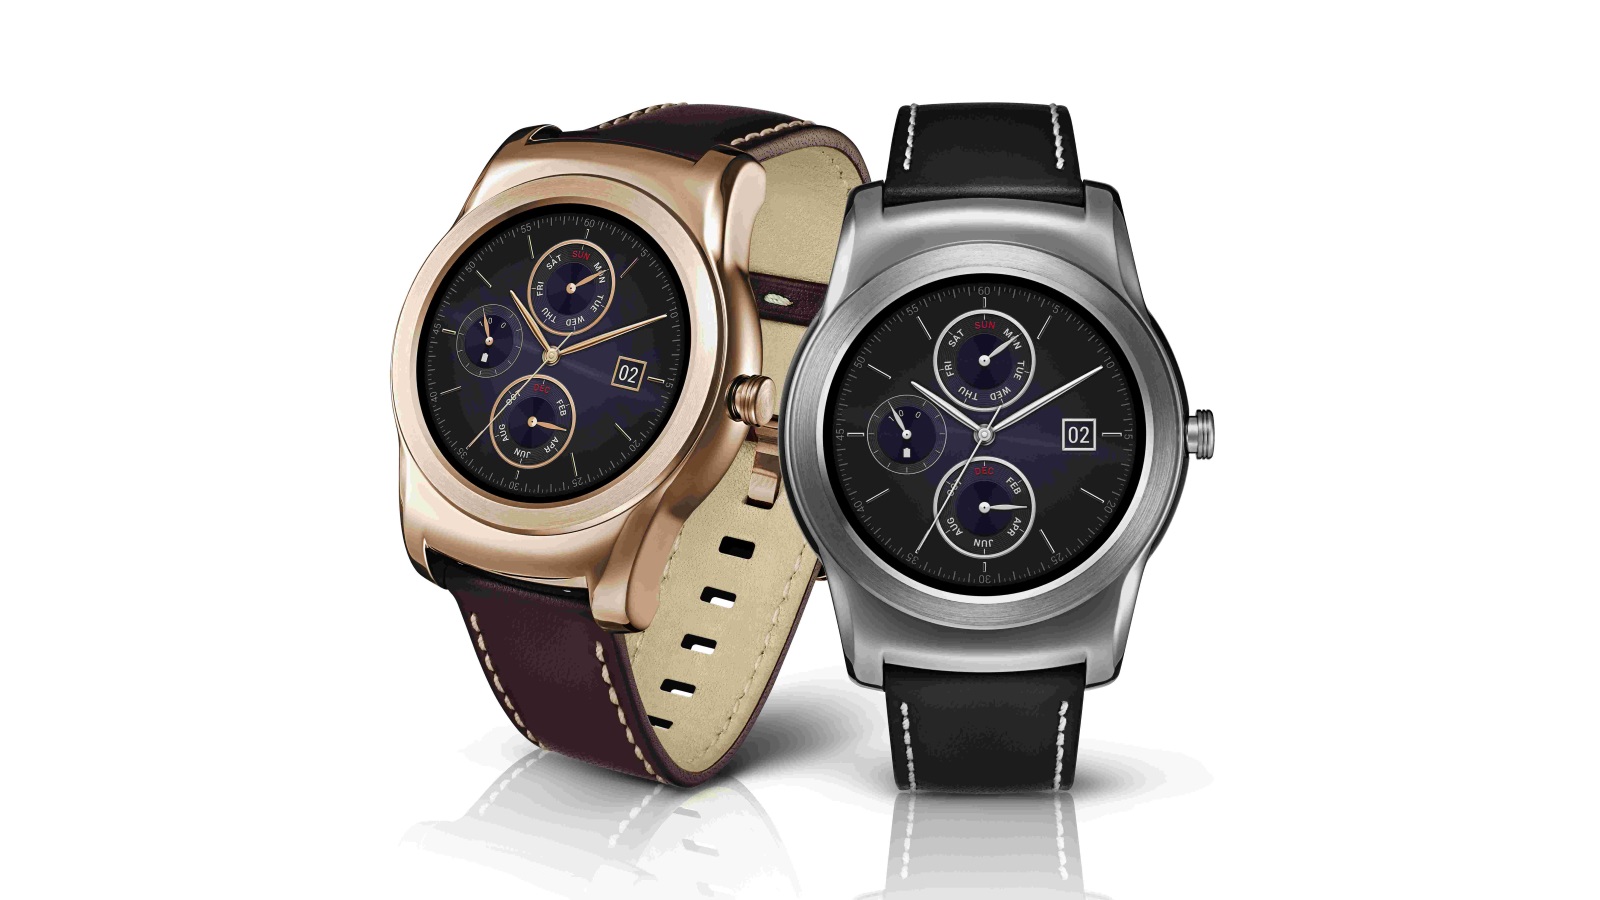 LG to unveil upscale LG Watch Urbane at MWC 2015